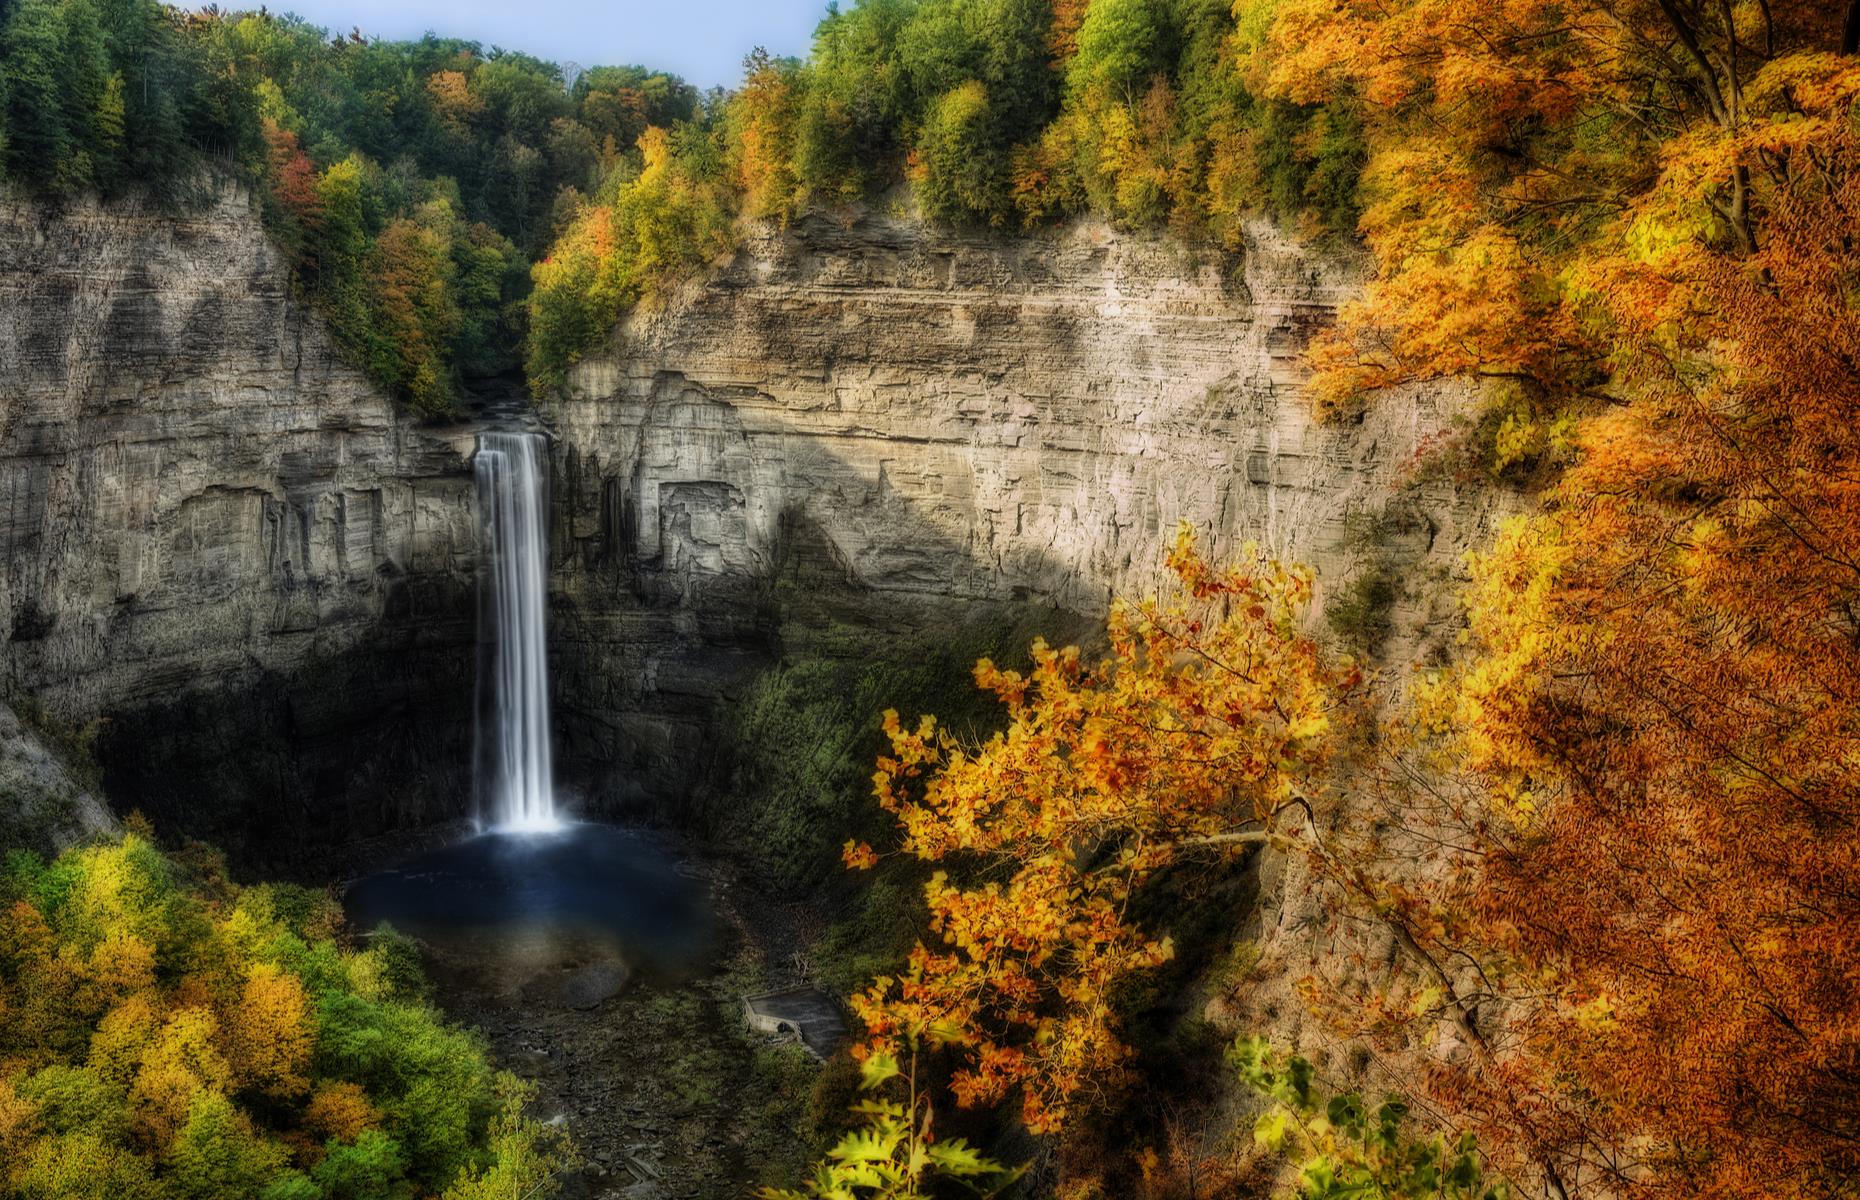 <p>Highlights include the Montezuma Wildlife Refuge with its bald eagles and waterfowl, plus the 215-foot (66m) watery cascade in Taughannock Falls State Park (pictured). A slew of wineries stud the byway too, each one as scenic as the next, from rustic <a href="https://www.buttonwoodgrove.com">Buttonwood Grove</a> to family-owned-and-operated <a href="https://www.cayugaridgewinery.com">Cayuga Ridge Estate</a>. Finish up in Ithaca, where the pedestrianized downtown area (named Ithaca Commons) is filled with quirky shops and restaurants.</p>